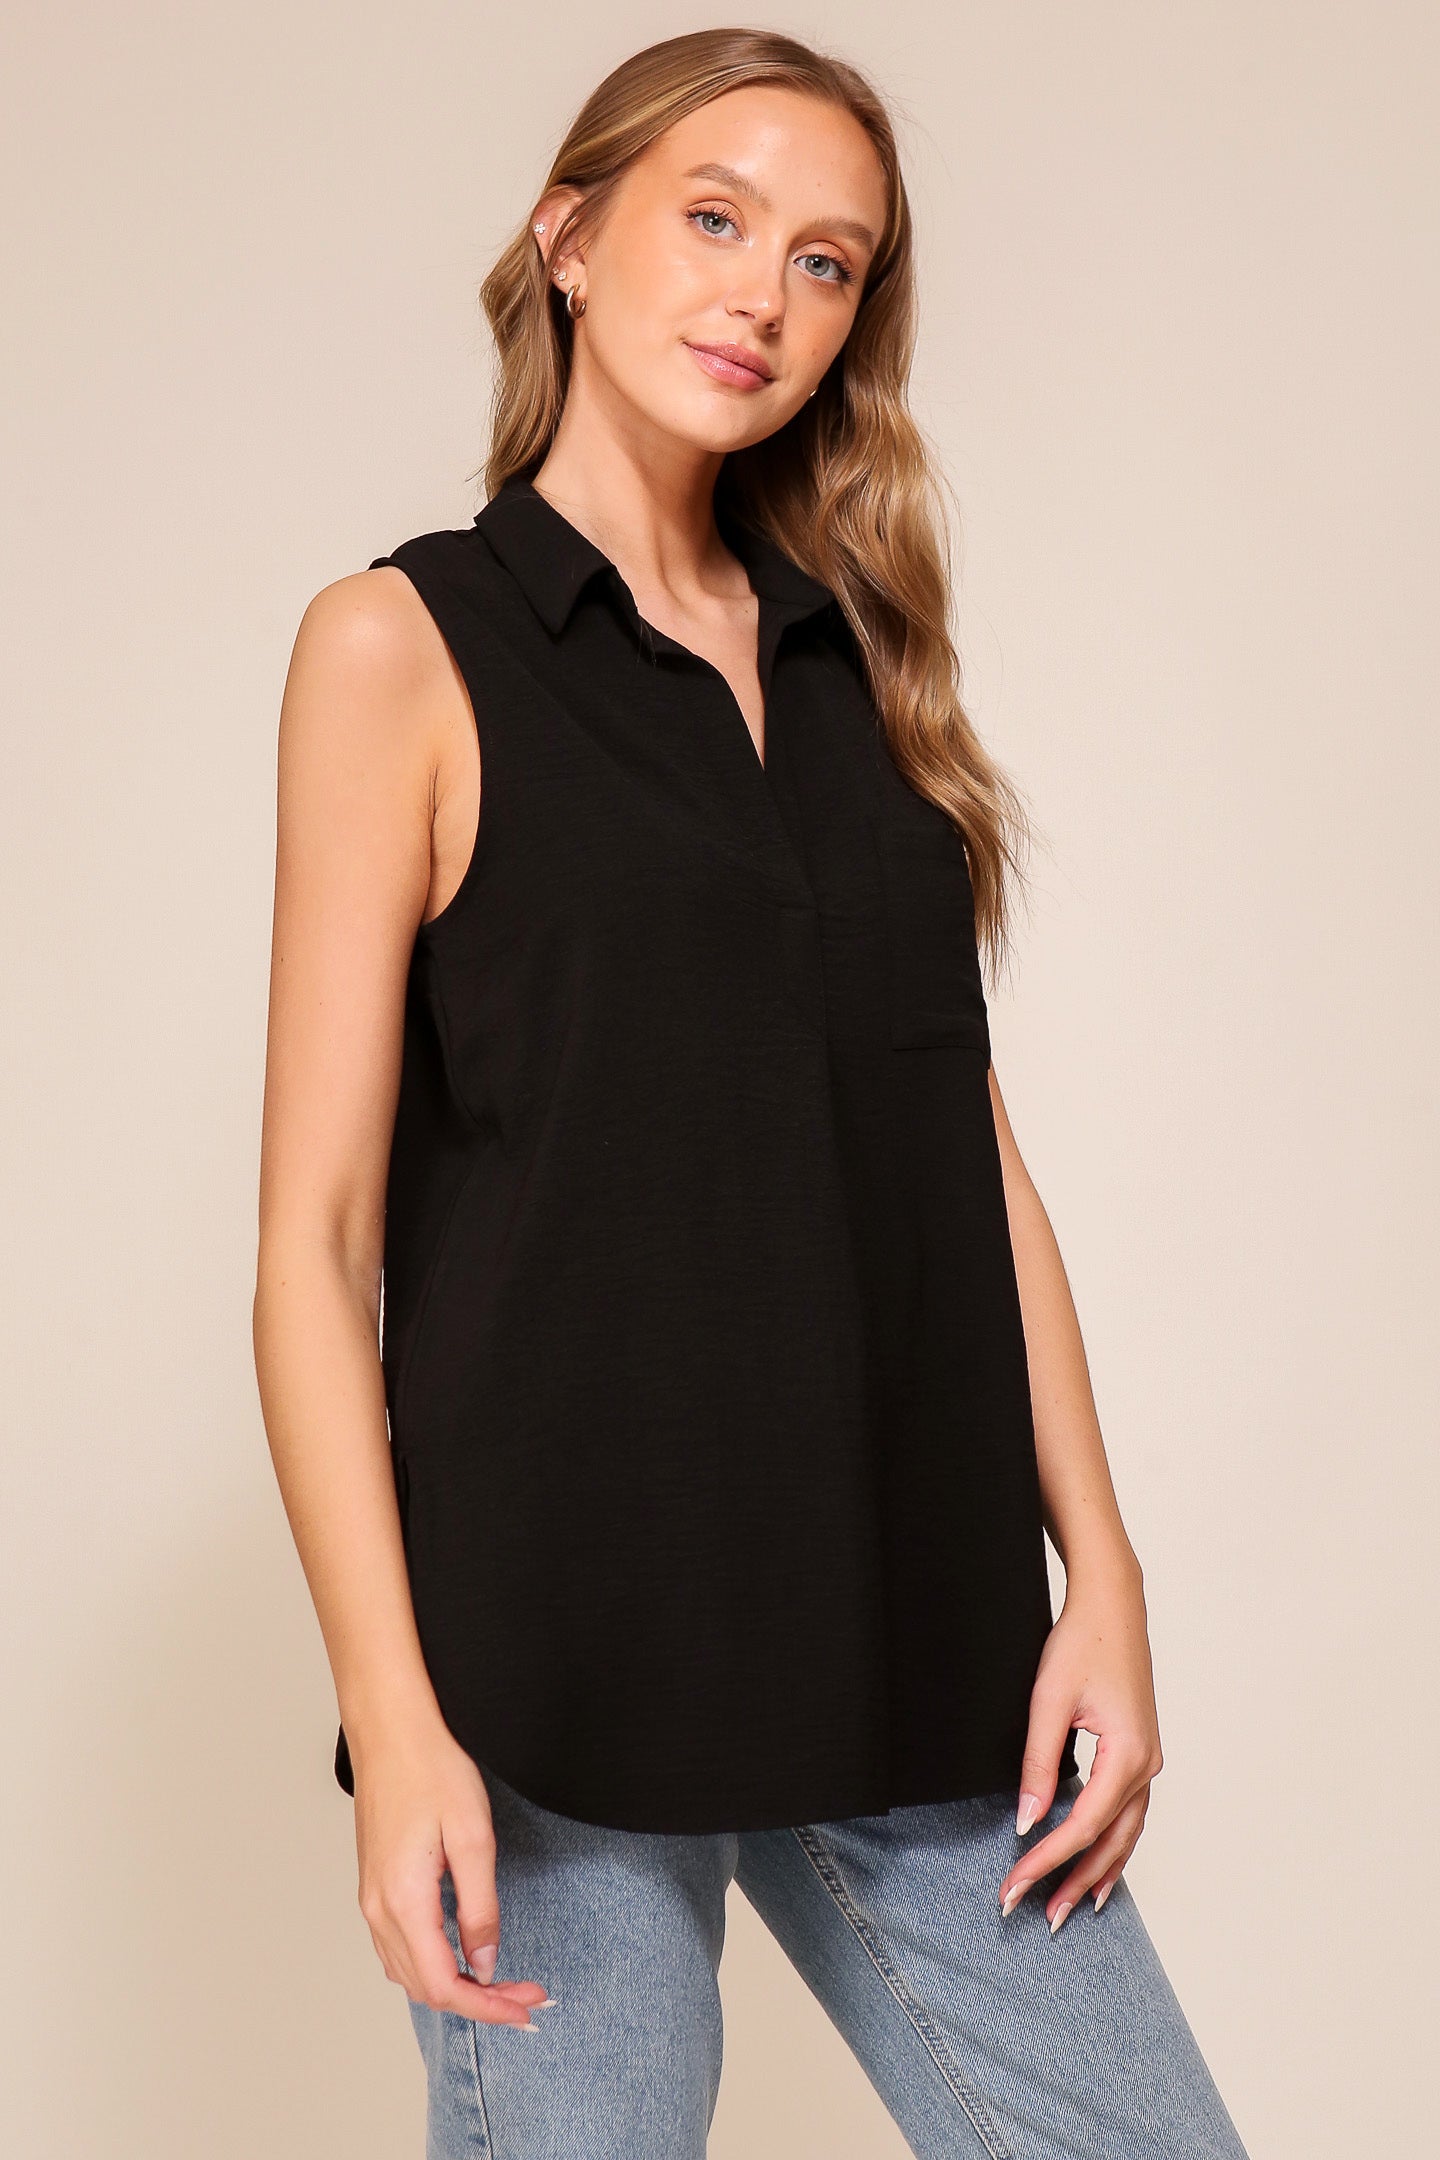 Front view of Timing (WN9713) women's Sleeveless Collared V-Neck Top with Chest Pocket and Flared Silhouette in Black 